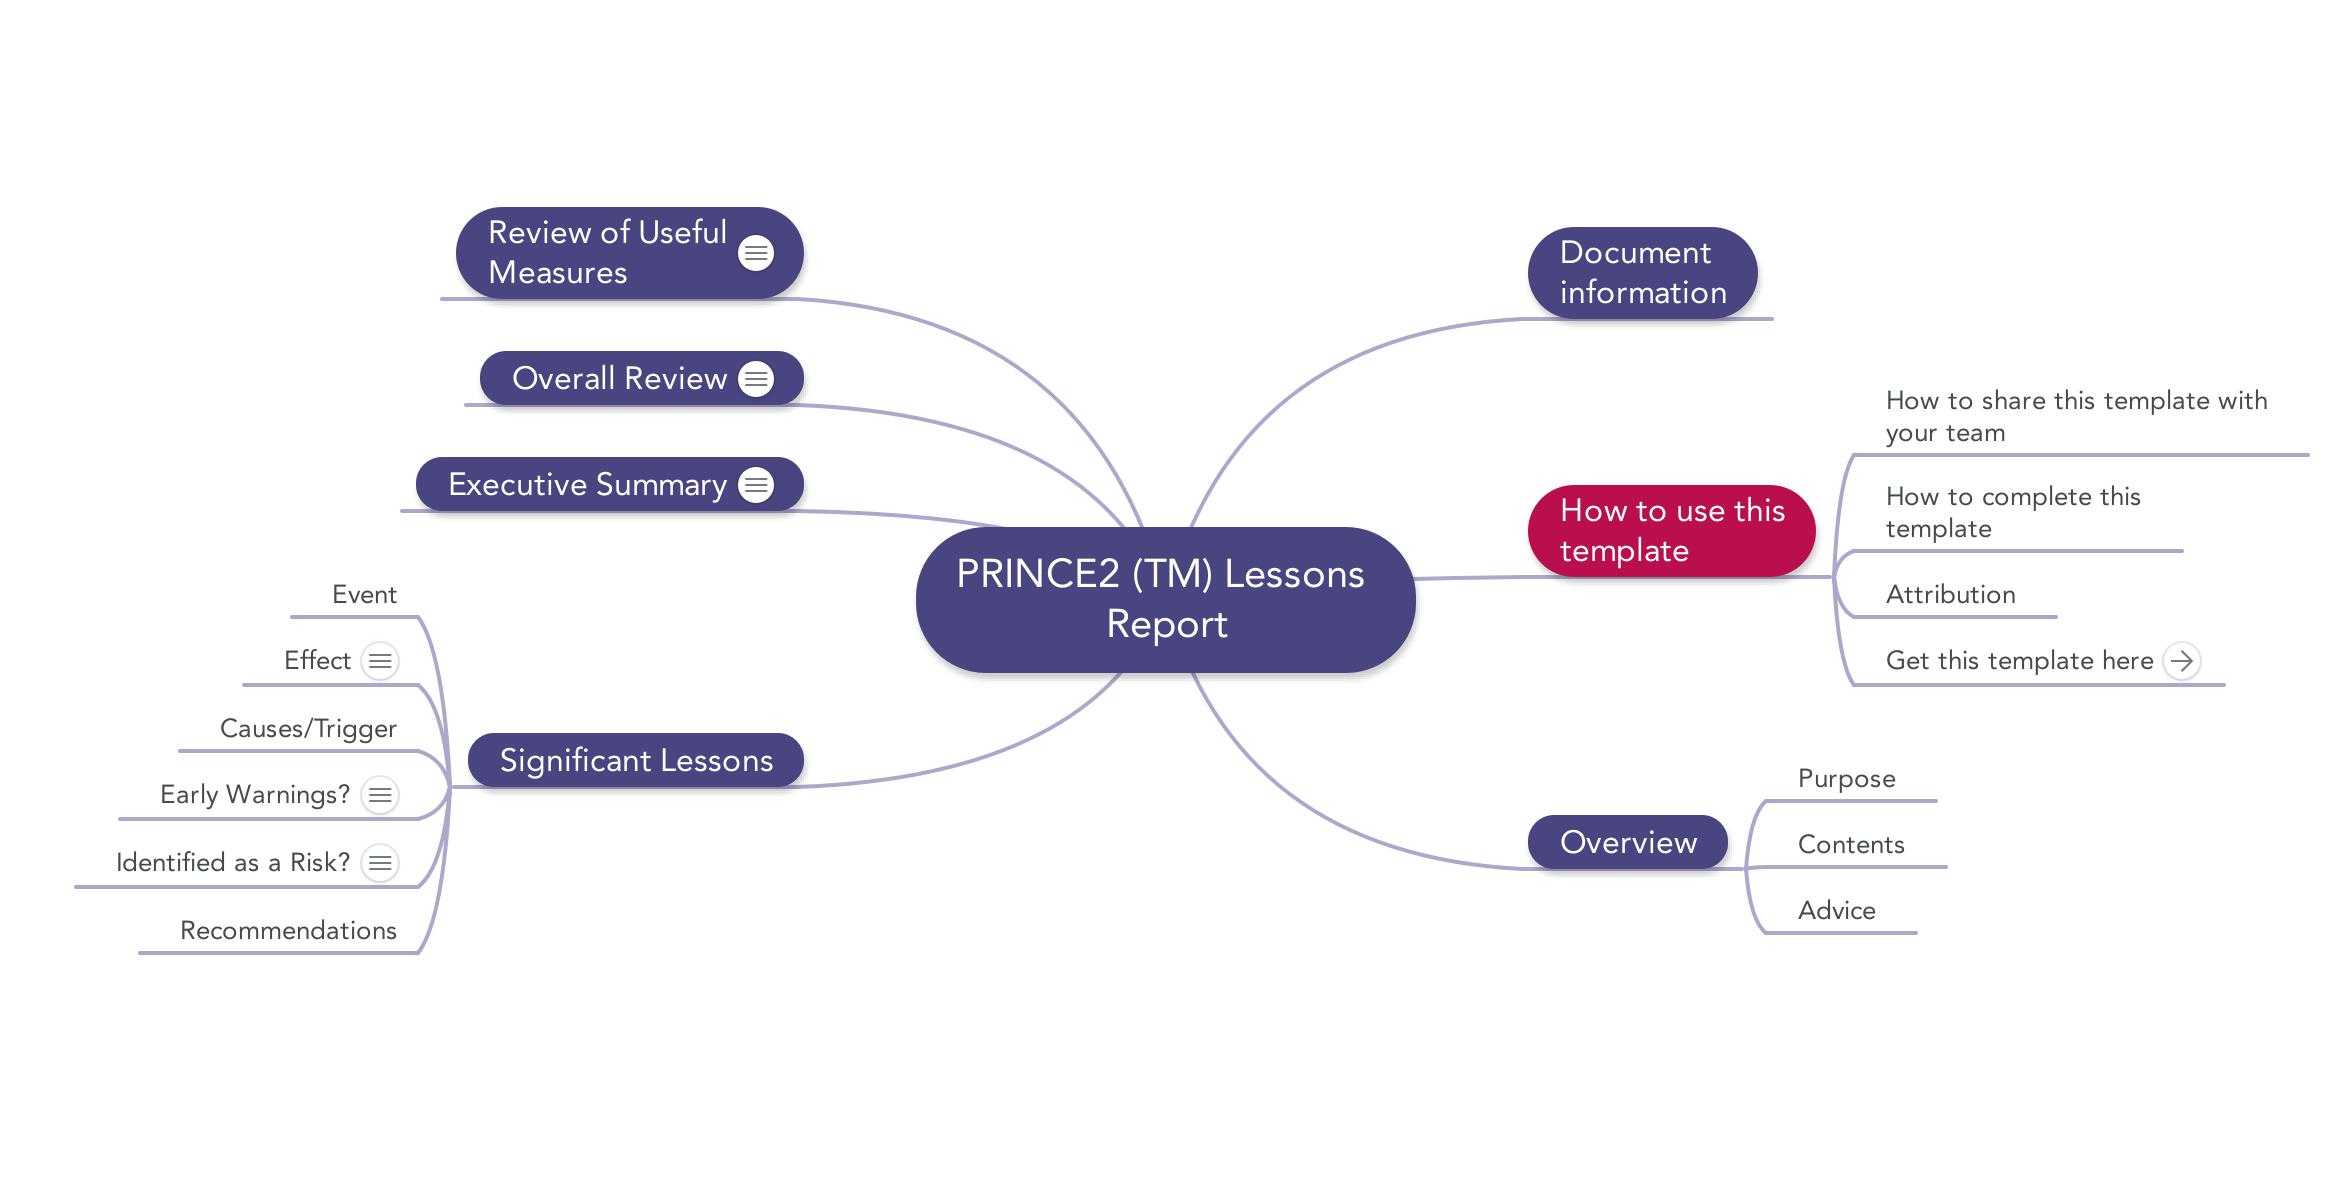 Prince2 Lessons Report | Download Template With Regard To Prince2 Lessons Learned Report Template